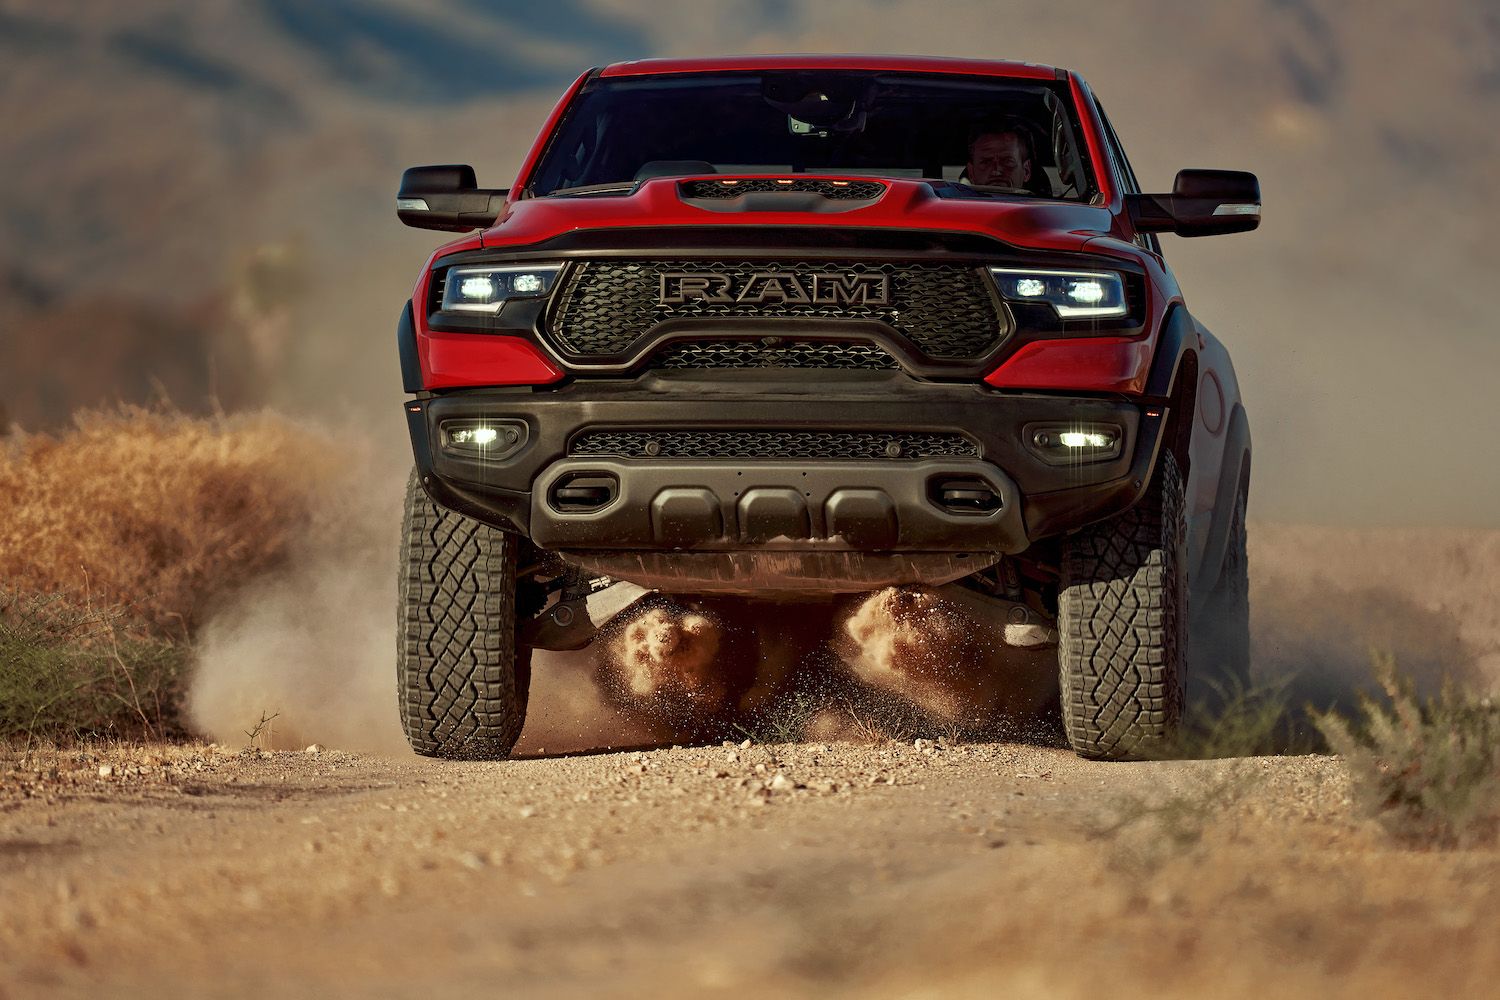 An image of the Ram 1500 TRX in motion